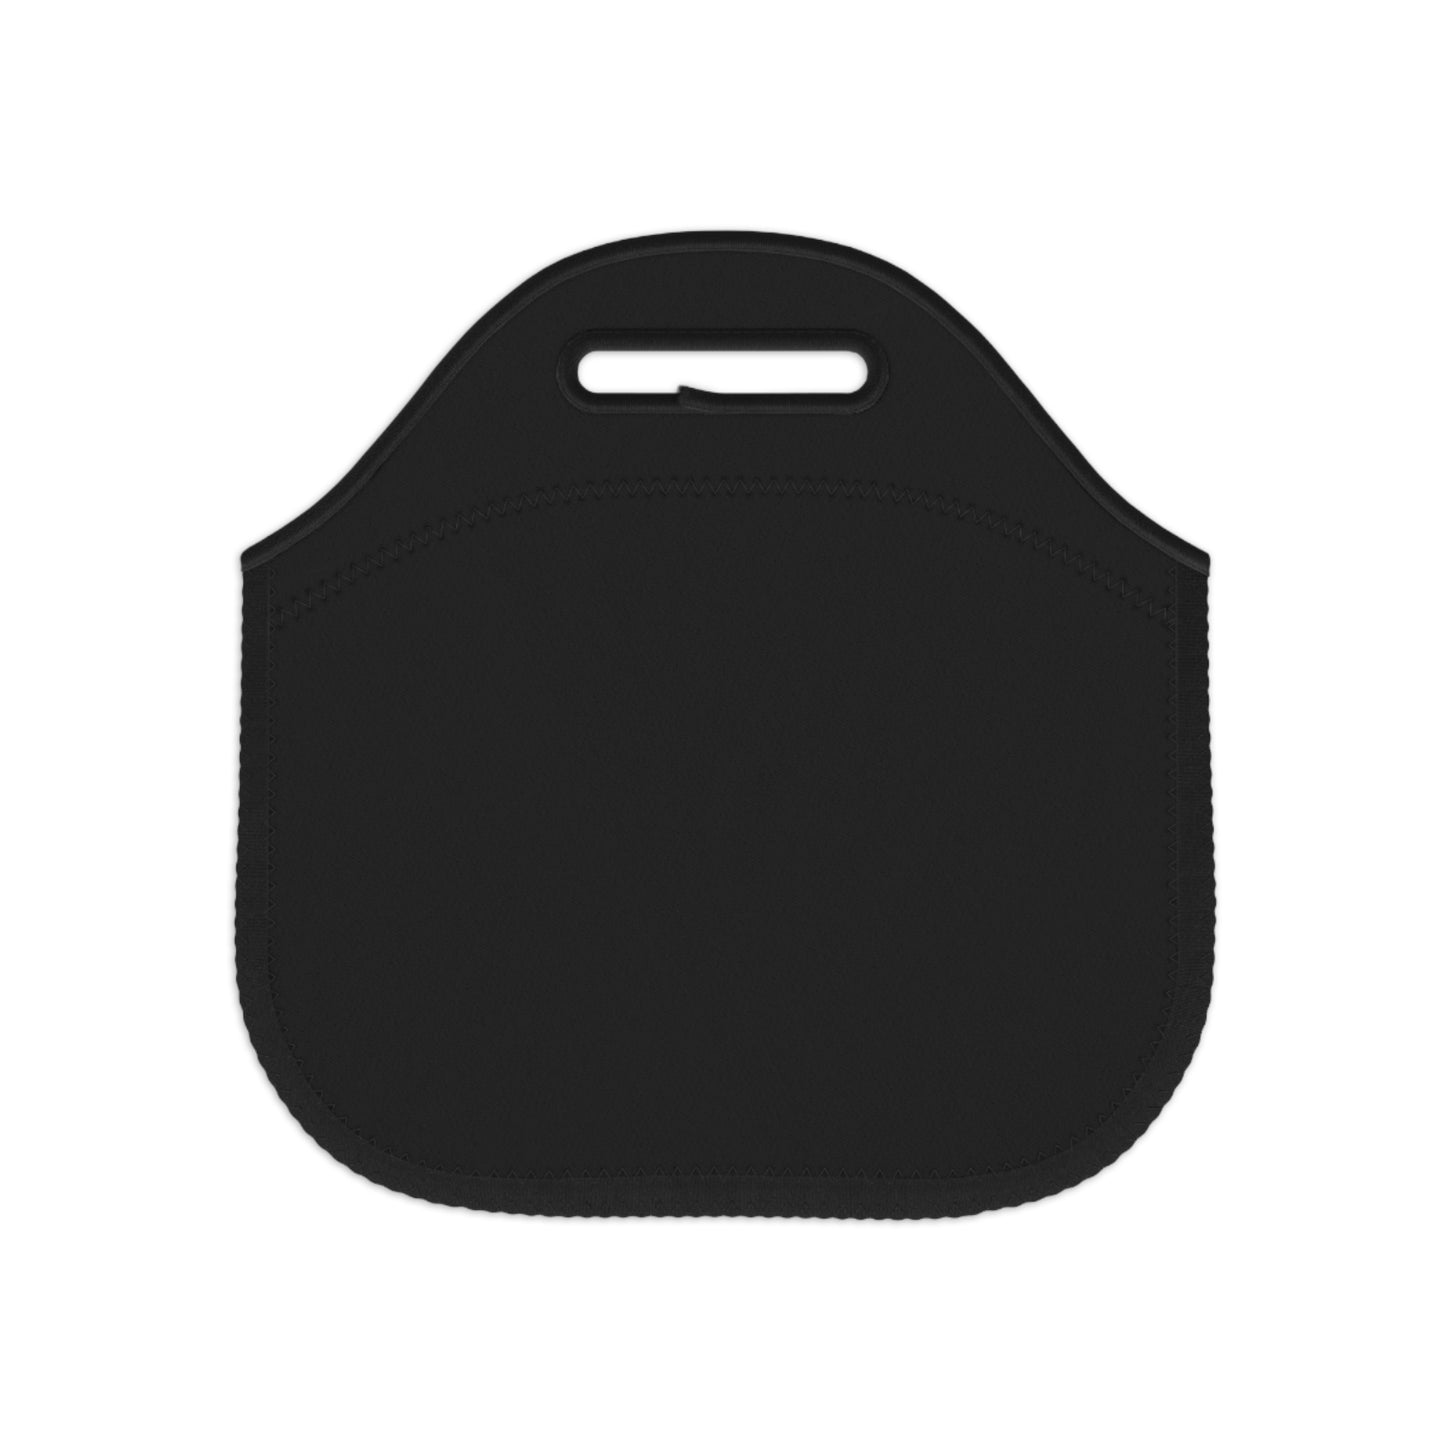 The Half Rooster! Neoprene Lunch Bag